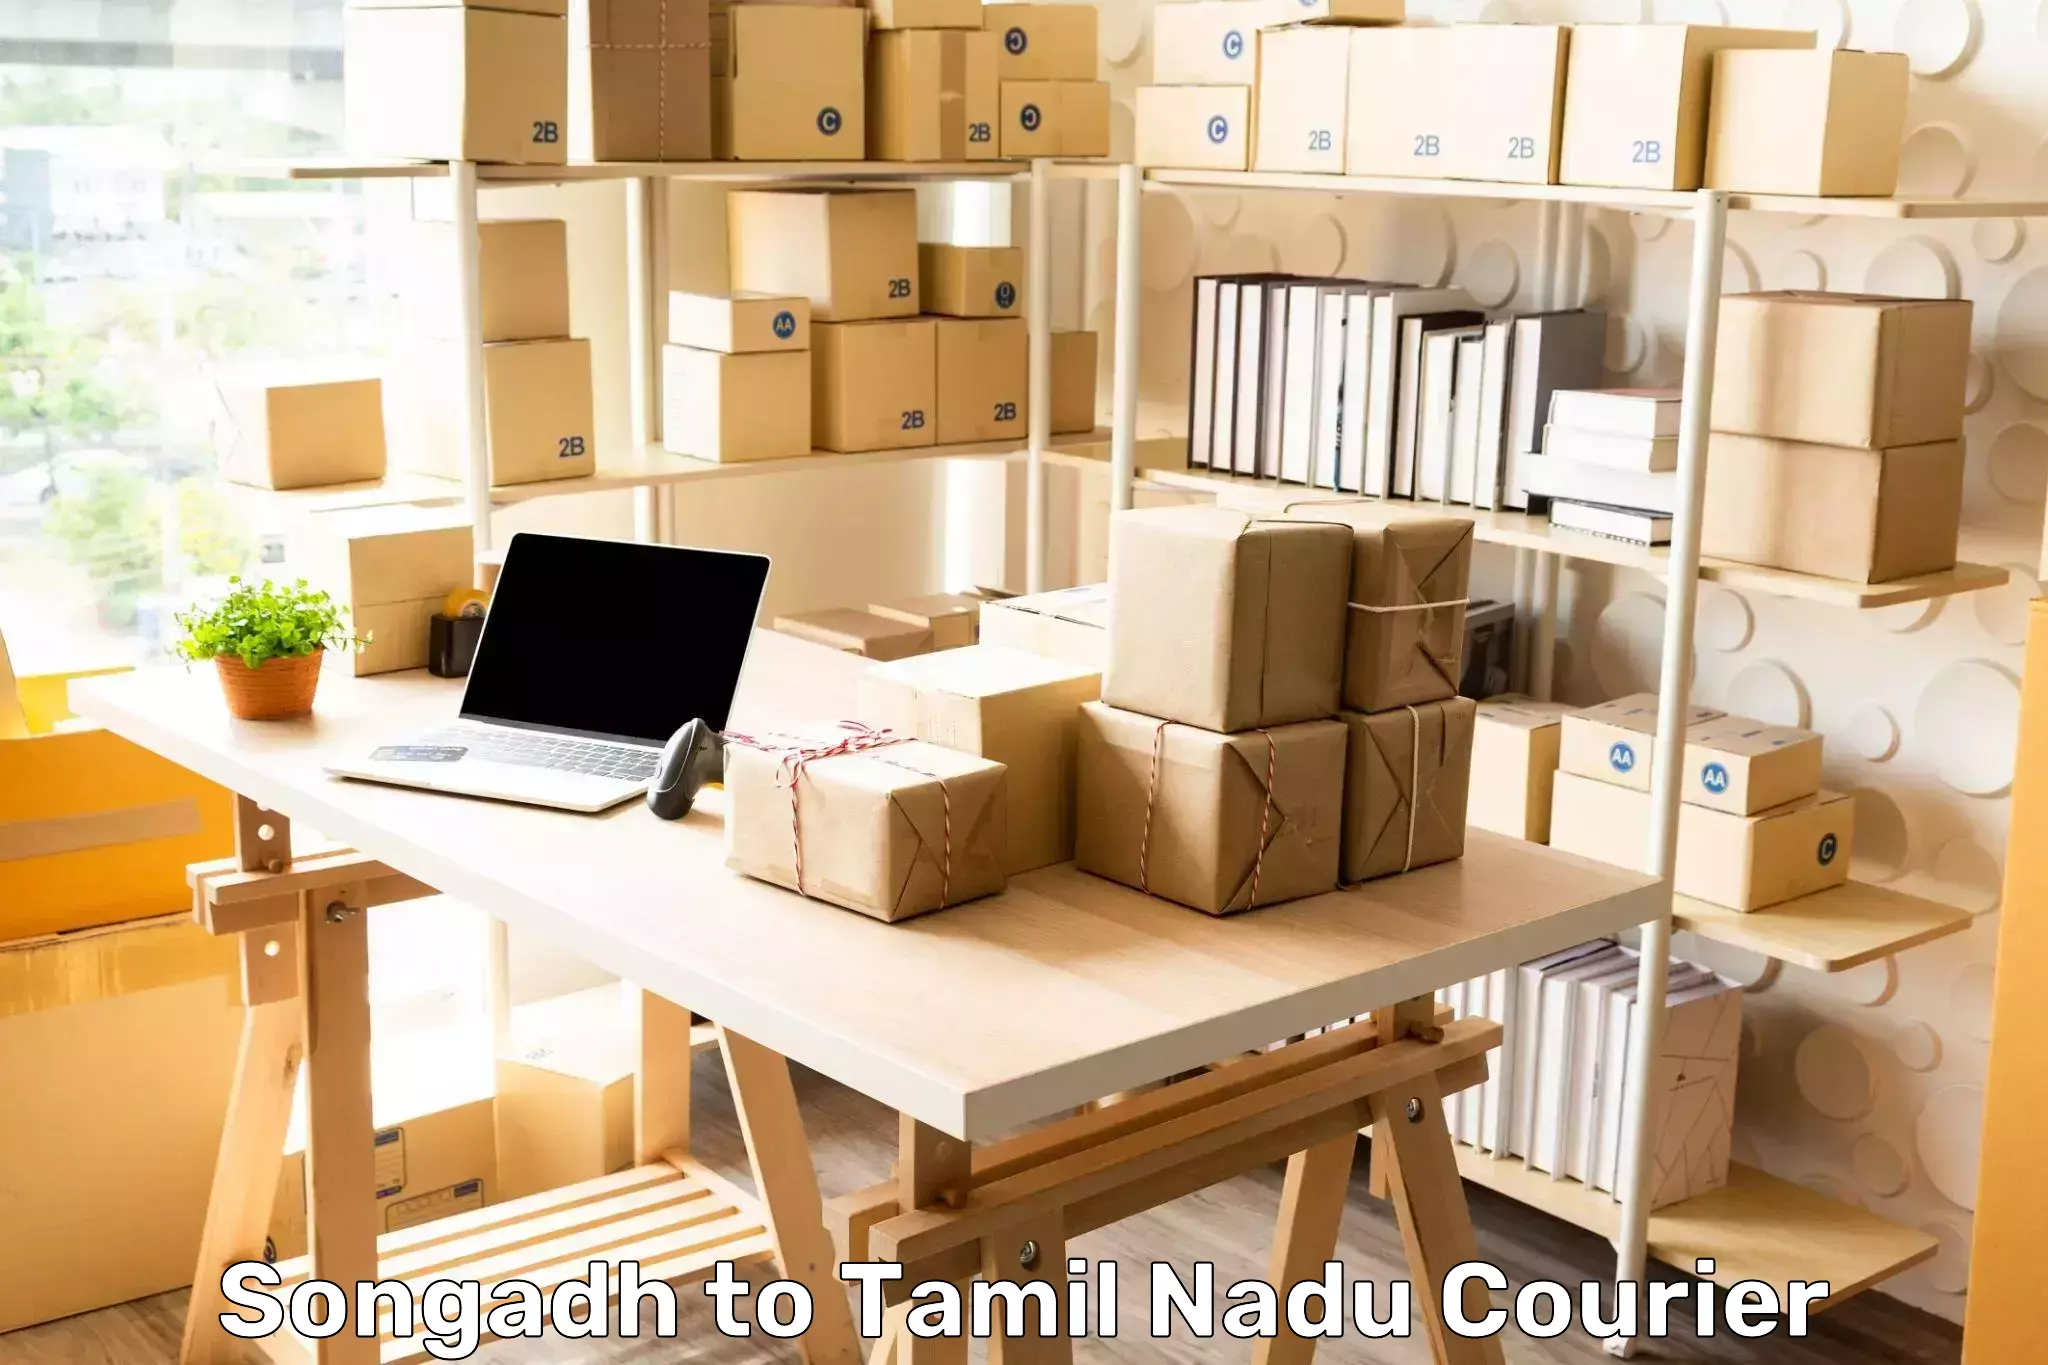 International courier rates in Songadh to Orathanadu